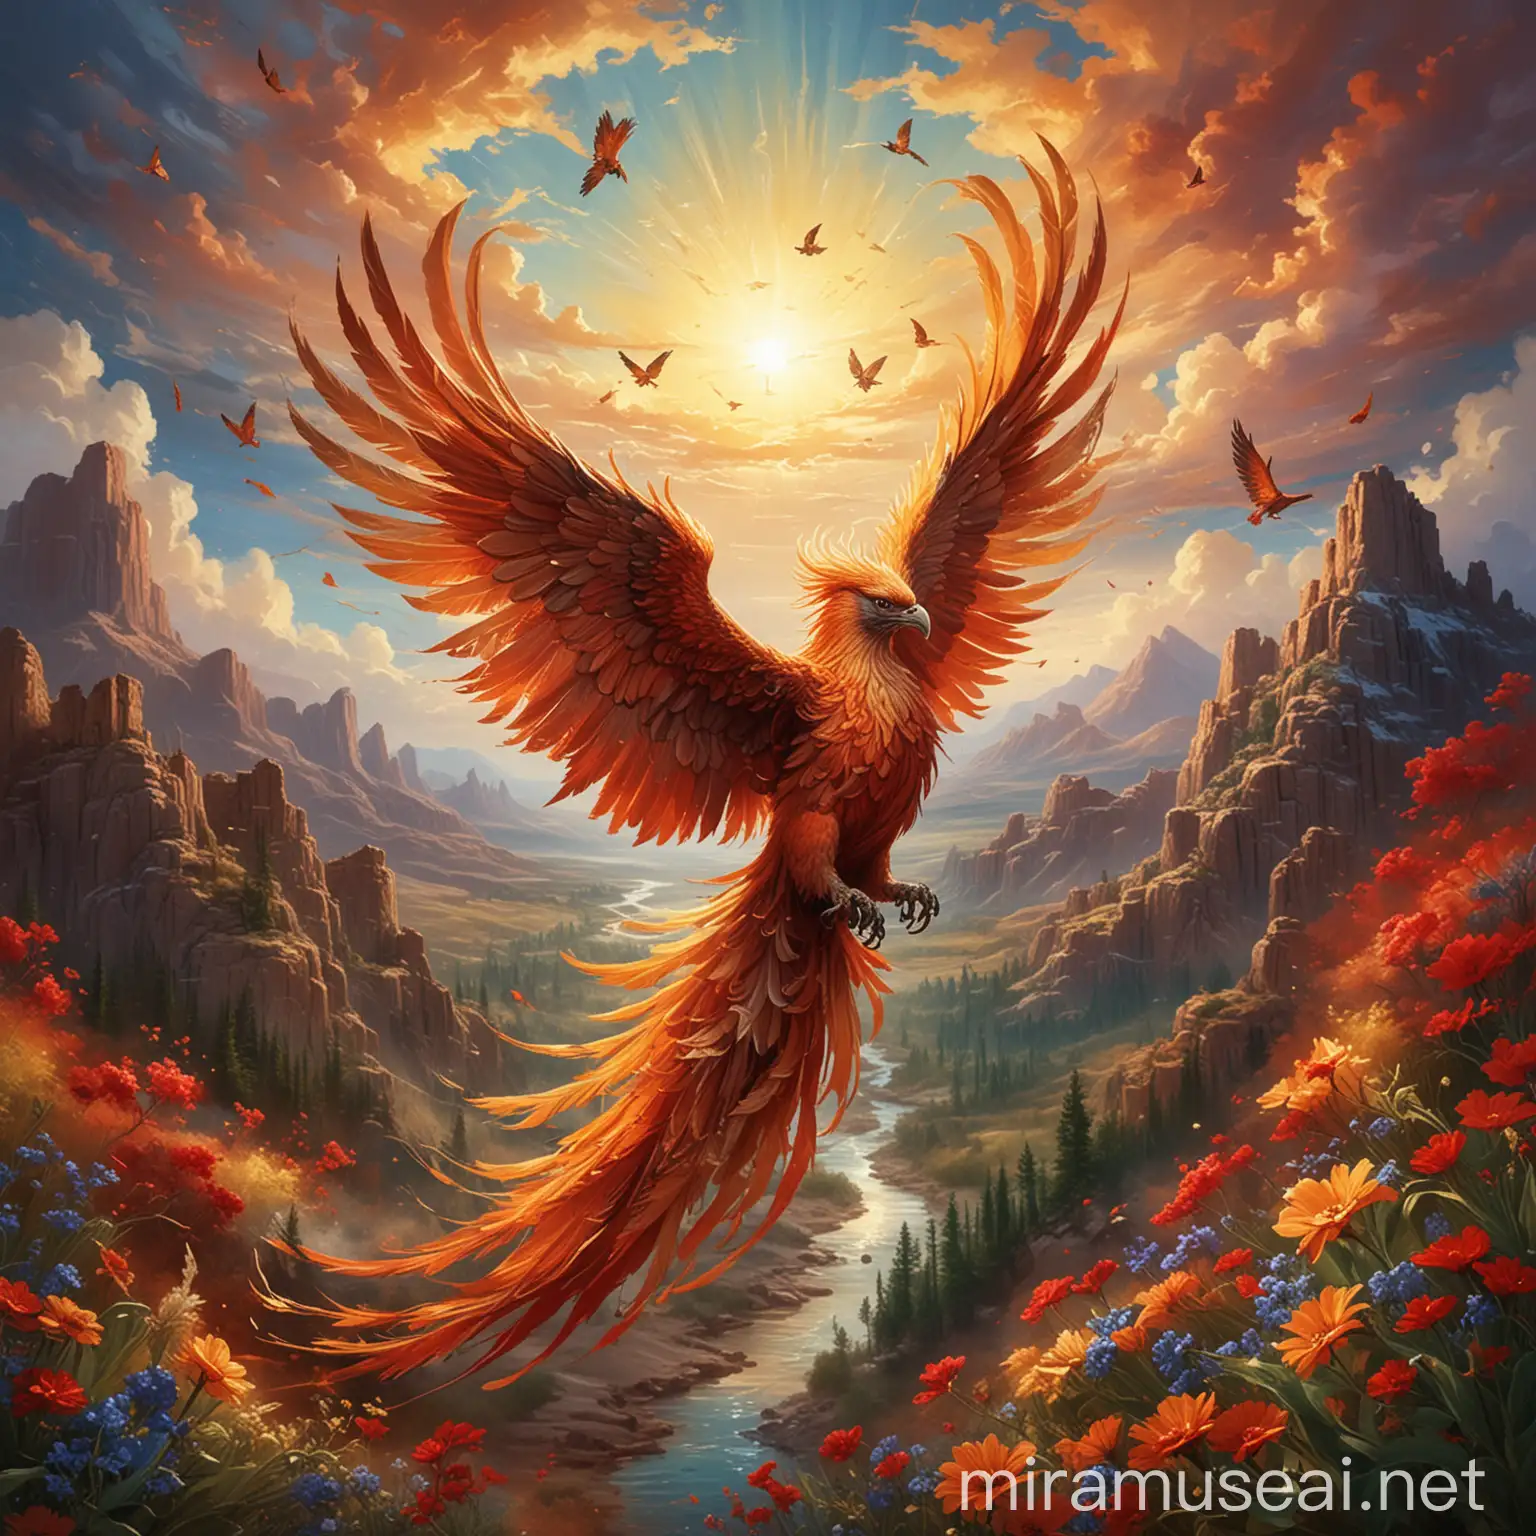 /imagine prompt: A magnificent phoenix with its wings spread and soaring in the sky.   The phoenix is ​​a powerful symbol of freedom, rebirth, transformation and liberation from the chains of addiction.   Its vibrant, fiery plumage shines in shades of red (#FF4500), orange (#FFA500), and gold (#FFD700), symbolizing strength and renewal.   The background shows a clear blue sky (#87CEEB) with a few fluffy clouds (#F0F8FF), representing new beginnings and hope.   Beneath the Phoenix, the subtleties of broken chains and fading shadows represent victory over addiction. 

  The overall mood is glorious and liberating and captures the essence of the mythical and powerful nature of the Phoenix and the journey of overcoming and rising from past struggles.   Add radiant light effects around the phoenix, enhancing its fiery glow and emphasizing its divine nature. 

  Set the scene in a calm, natural environment, such as a peaceful forest with lush trees (#228B22) and vibrant colorful flowers (#FF69B4, #FFD700), or a peaceful mountain landscape with soft, earthy colors (#8B4513).  ) is a symbol of healing and recovery.   Place a flowing river (#4682B4) in the background, which reflects light and adds a sense of calm and continuity.

  Take inspiration from Vincent van Gogh's expressive brushwork and vibrant color palette to create a dynamic and emotionally powerful image.   Use swirling patterns in the sky and landscape to add a sense of movement and energy.   Include small details like butterflies fluttering around (#FFB6C1) and birds flying in the distance (#4682B4), which symbolize freedom and new life.

 .   Add a soft halo effect around the phoenix to show its sacred and transformative nature.   Feathers should have intricate and detailed patterns that absorb light